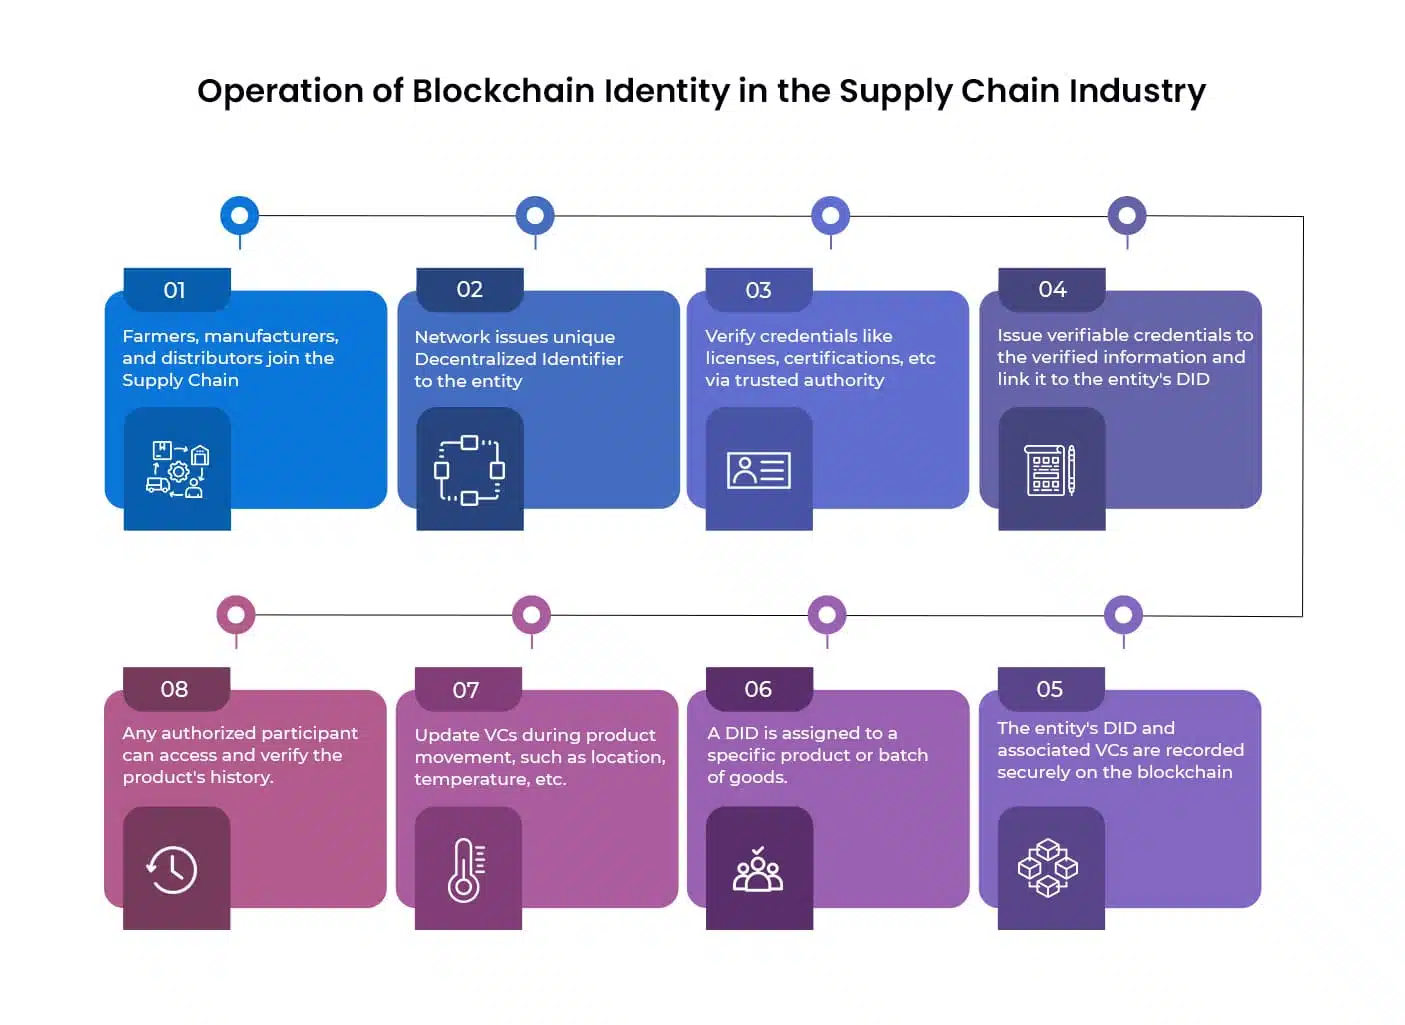 Operations Of Blockchain Identity In Supply Chain Industry Infographic